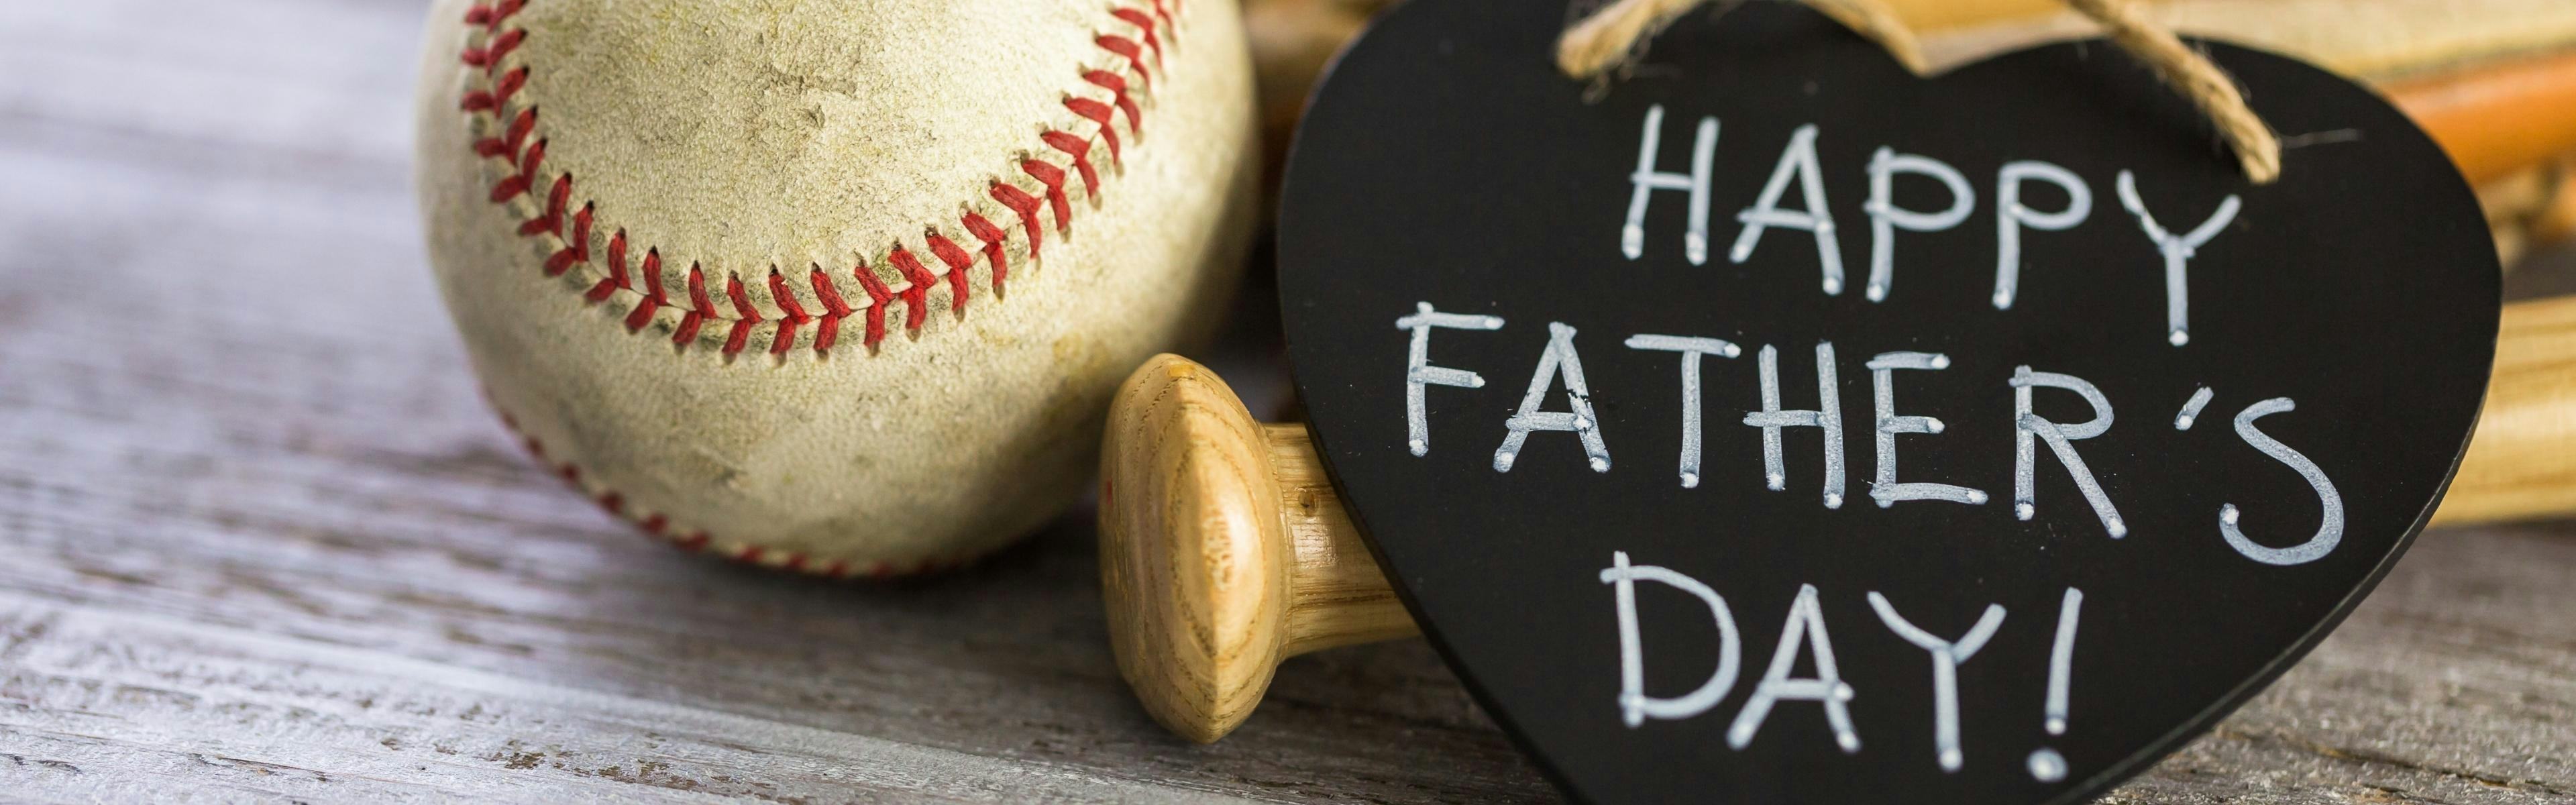 baseball and fathers day sign